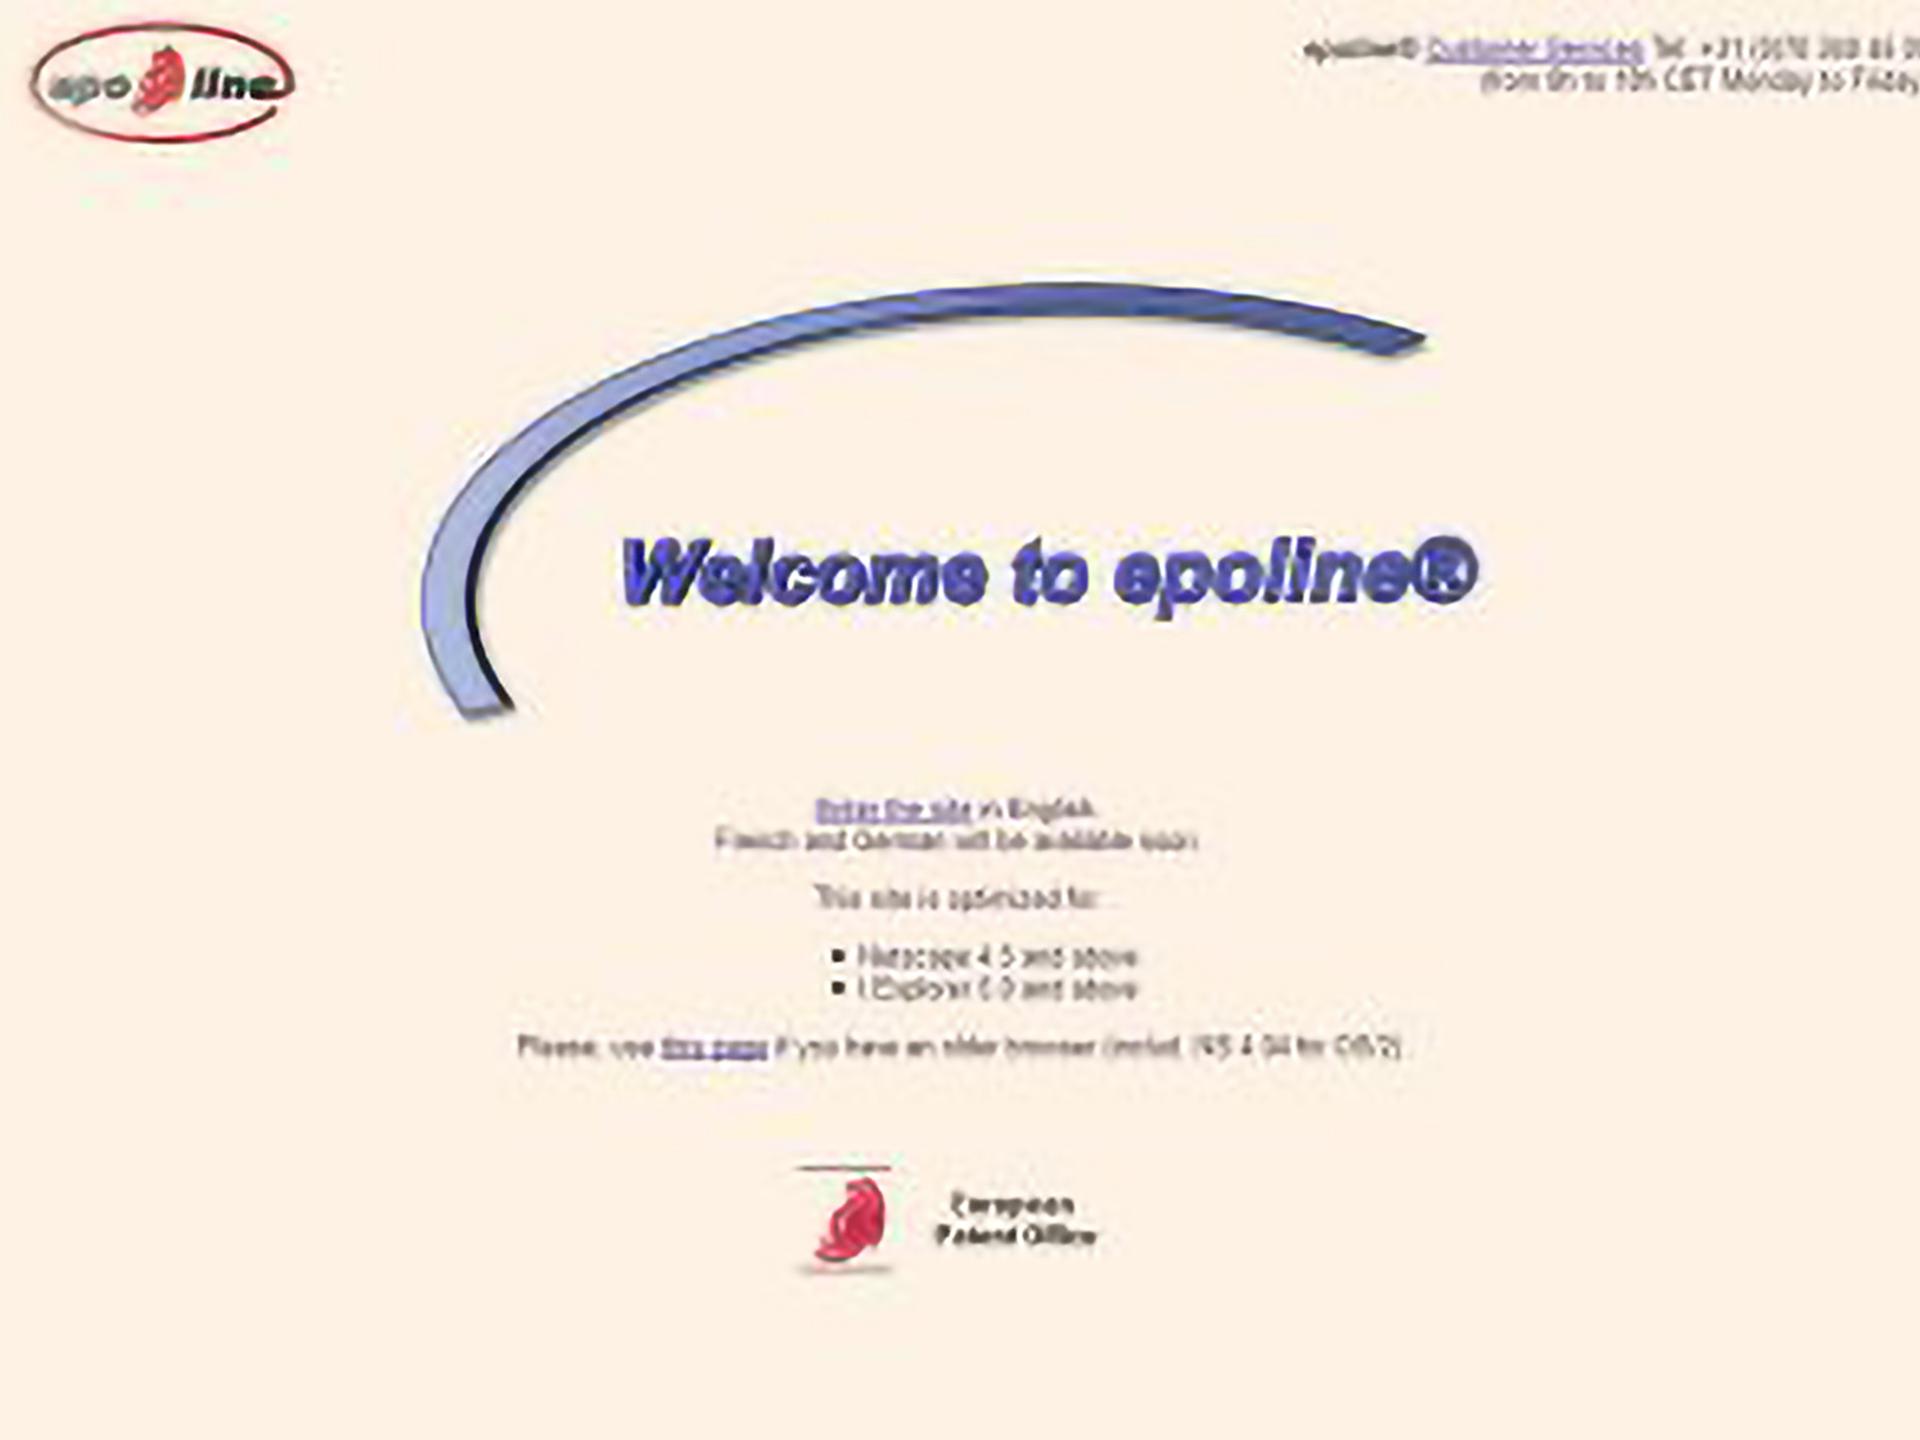 Welcome to epoline